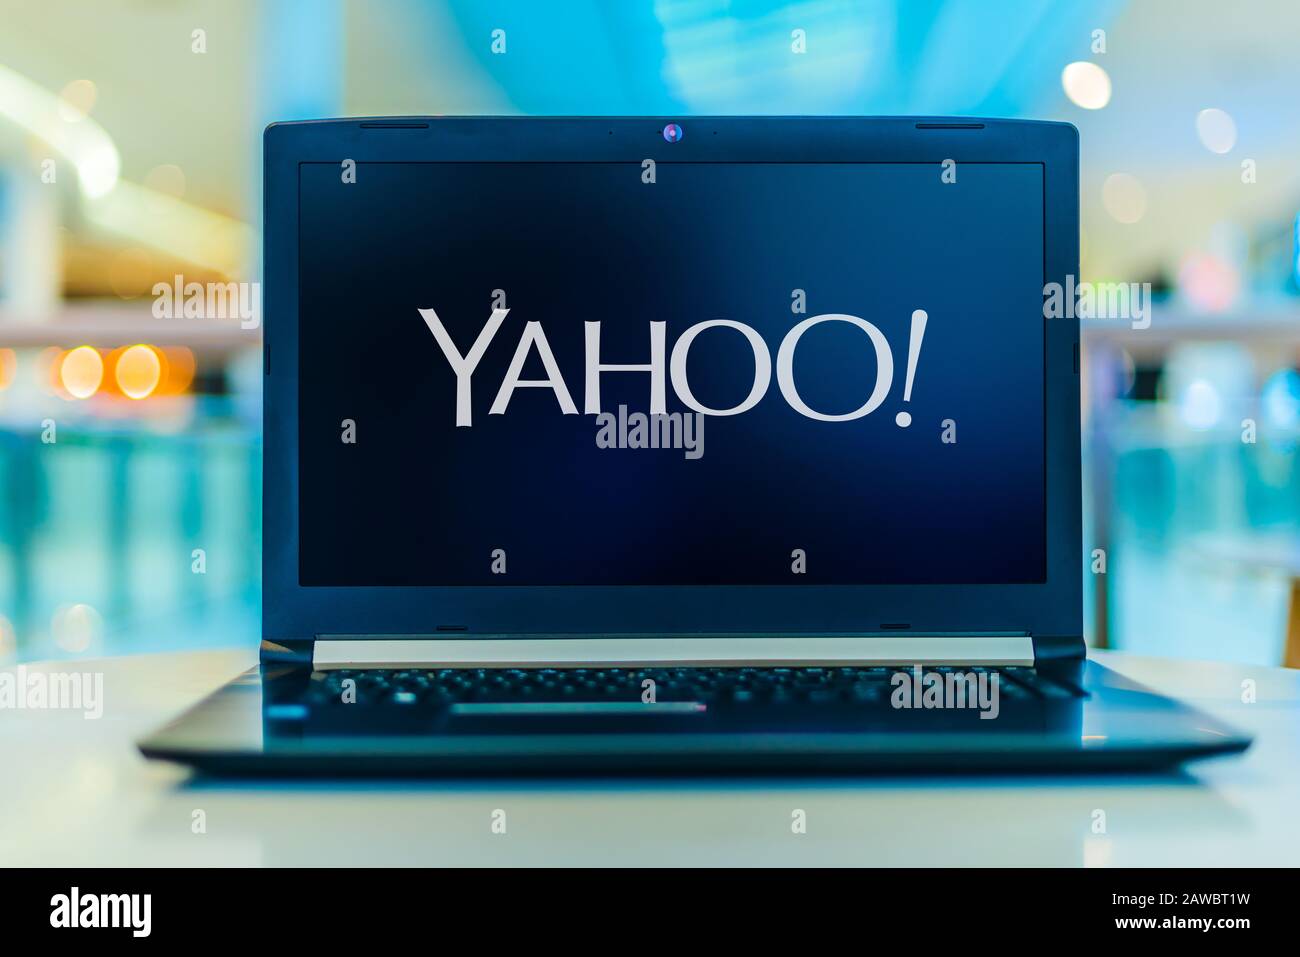 POZNAN, POL - JAN 30, 2020: Laptop computer displaying logo of Yahoo, a web services provider headquartered in Sunnyvale, California and owned by Veri Stock Photo